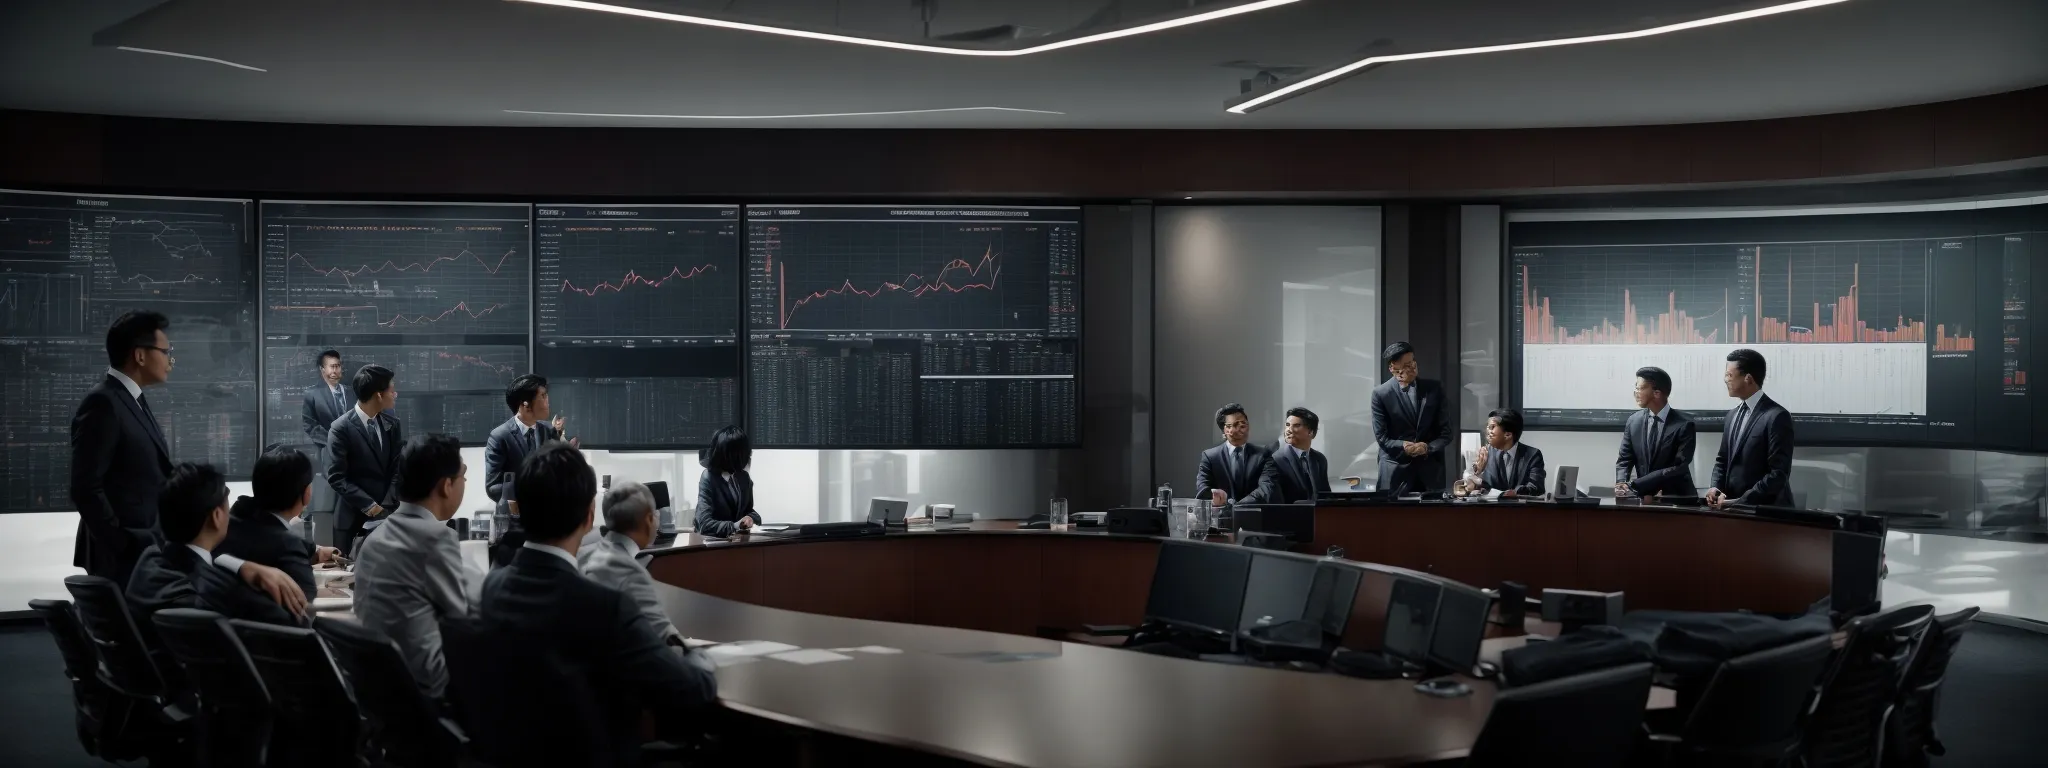 a boardroom with a large screen displaying graphs and charts while executives discuss strategic plans.